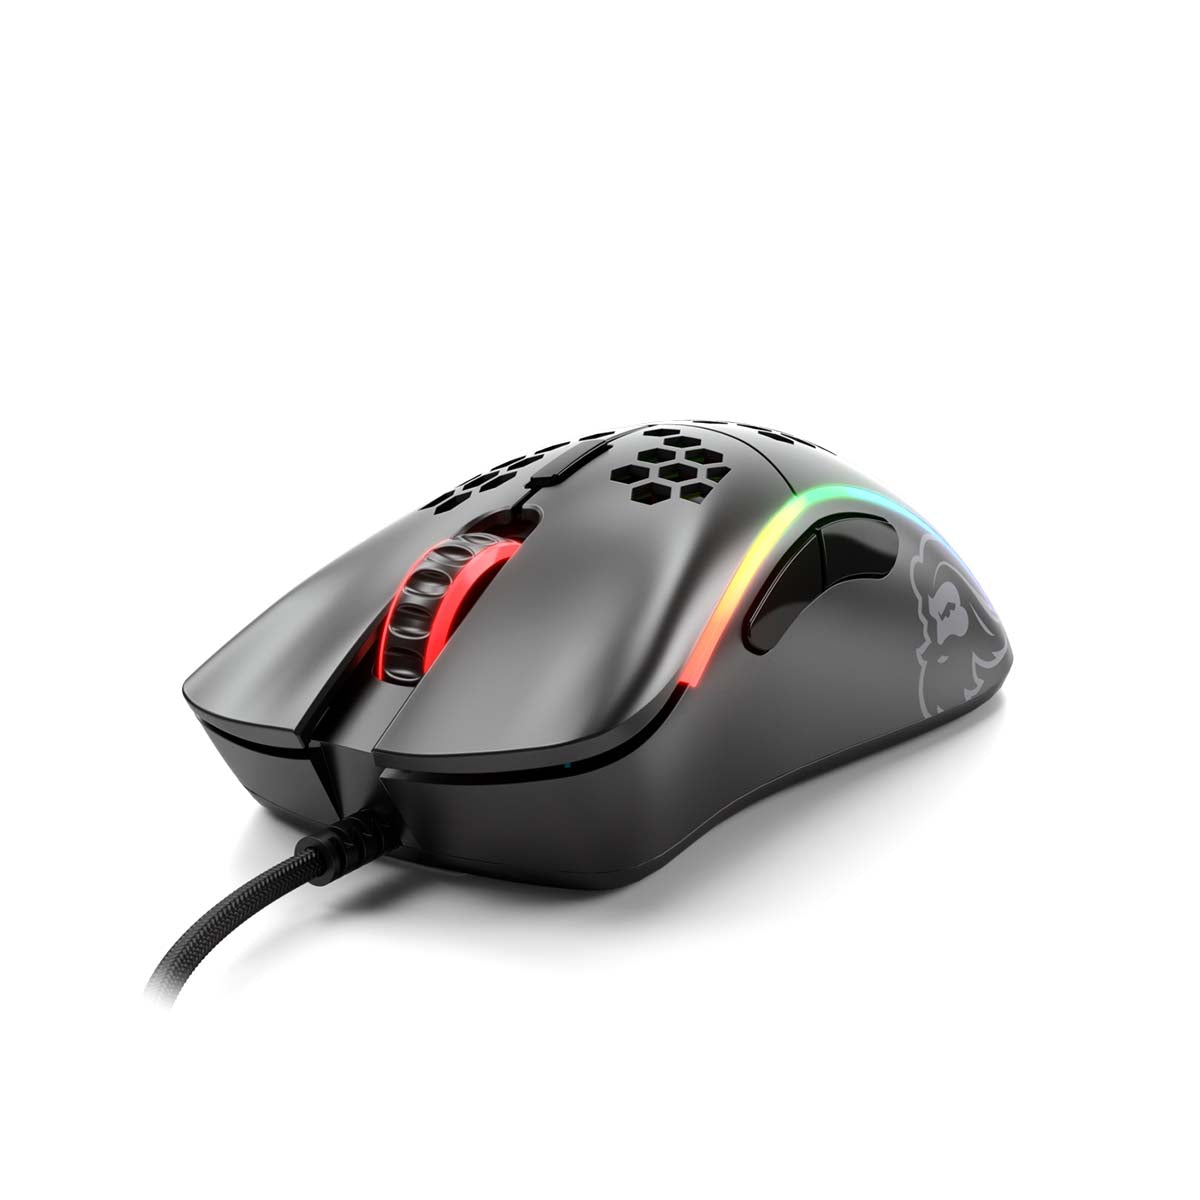 Glorious Model D- Wired Gaming Mouse - Matte Black